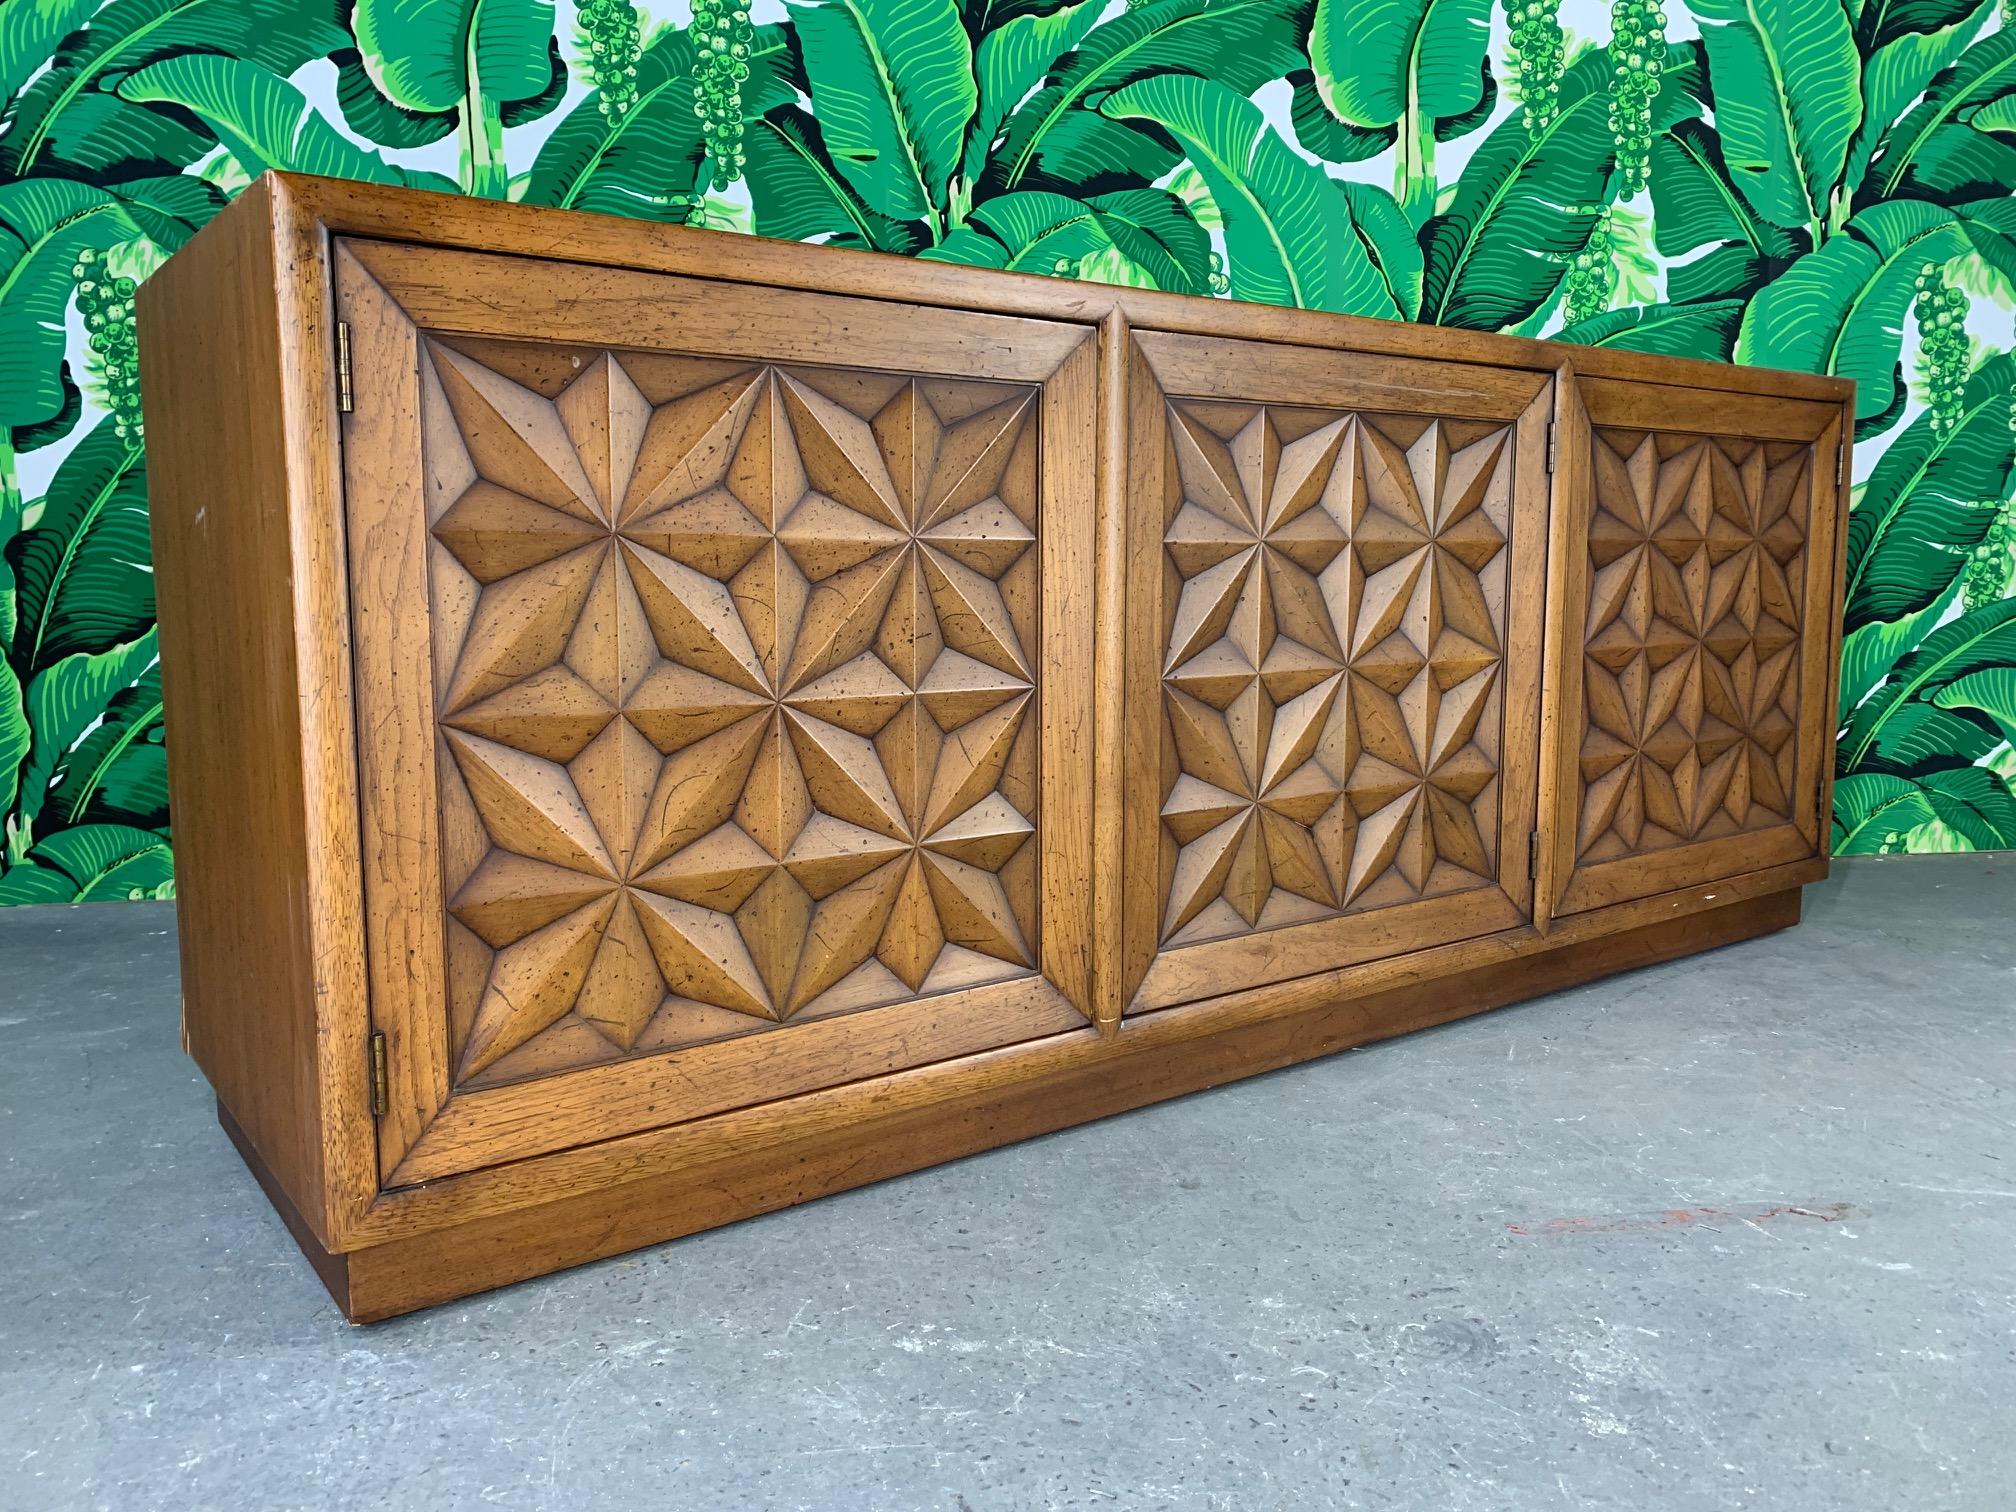 Large credenza by Henredon, part of the Folio Three collection. Features carved door fronts in a striking starburst design and hidden latches (push to open, push to close). Original finish with purposeful distressing, although very slight. Some